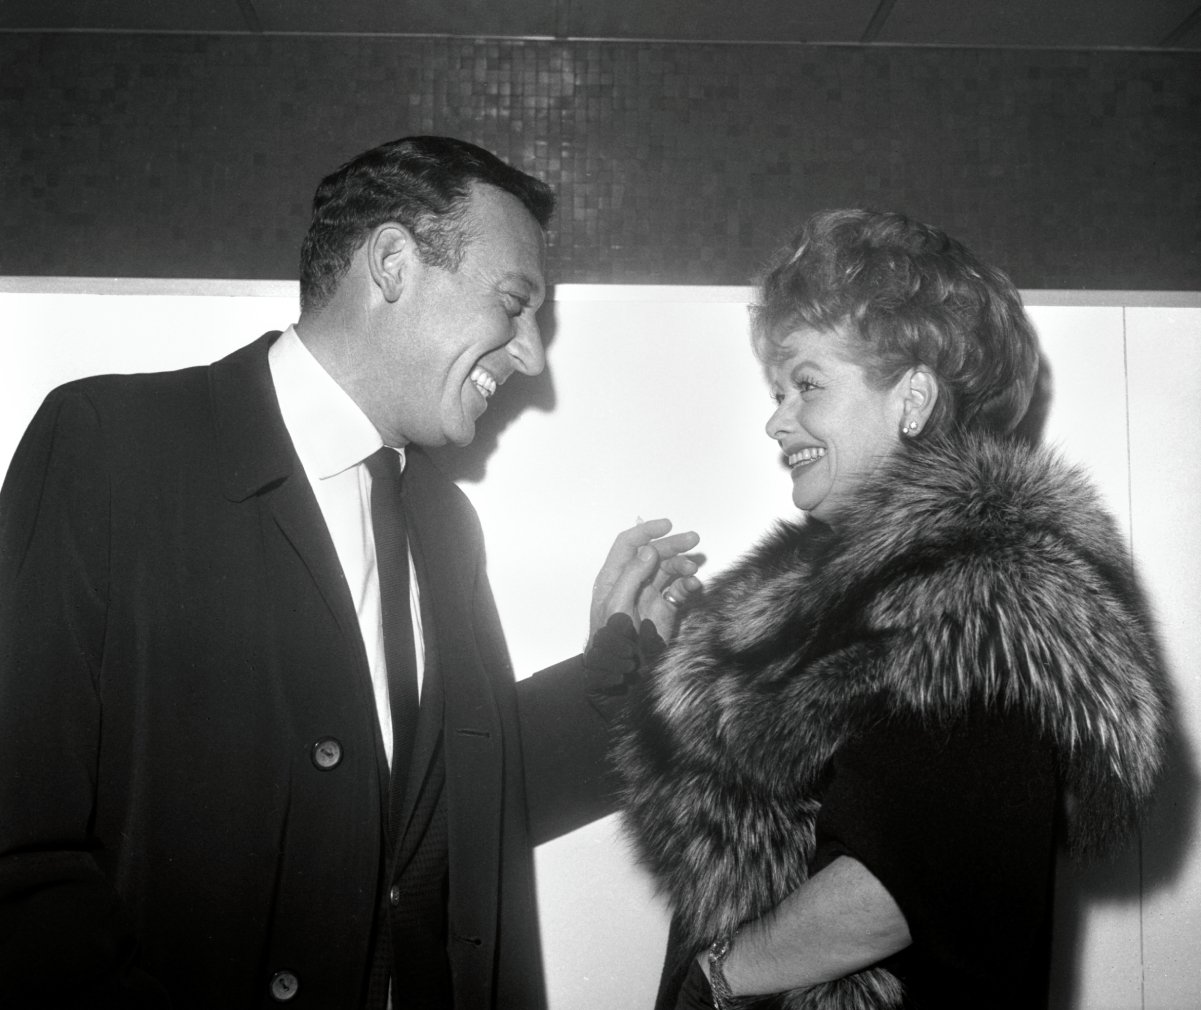 Iconic actor Lucille Ball, right, with husband, comedian and producer Gary Morton, in 1962.